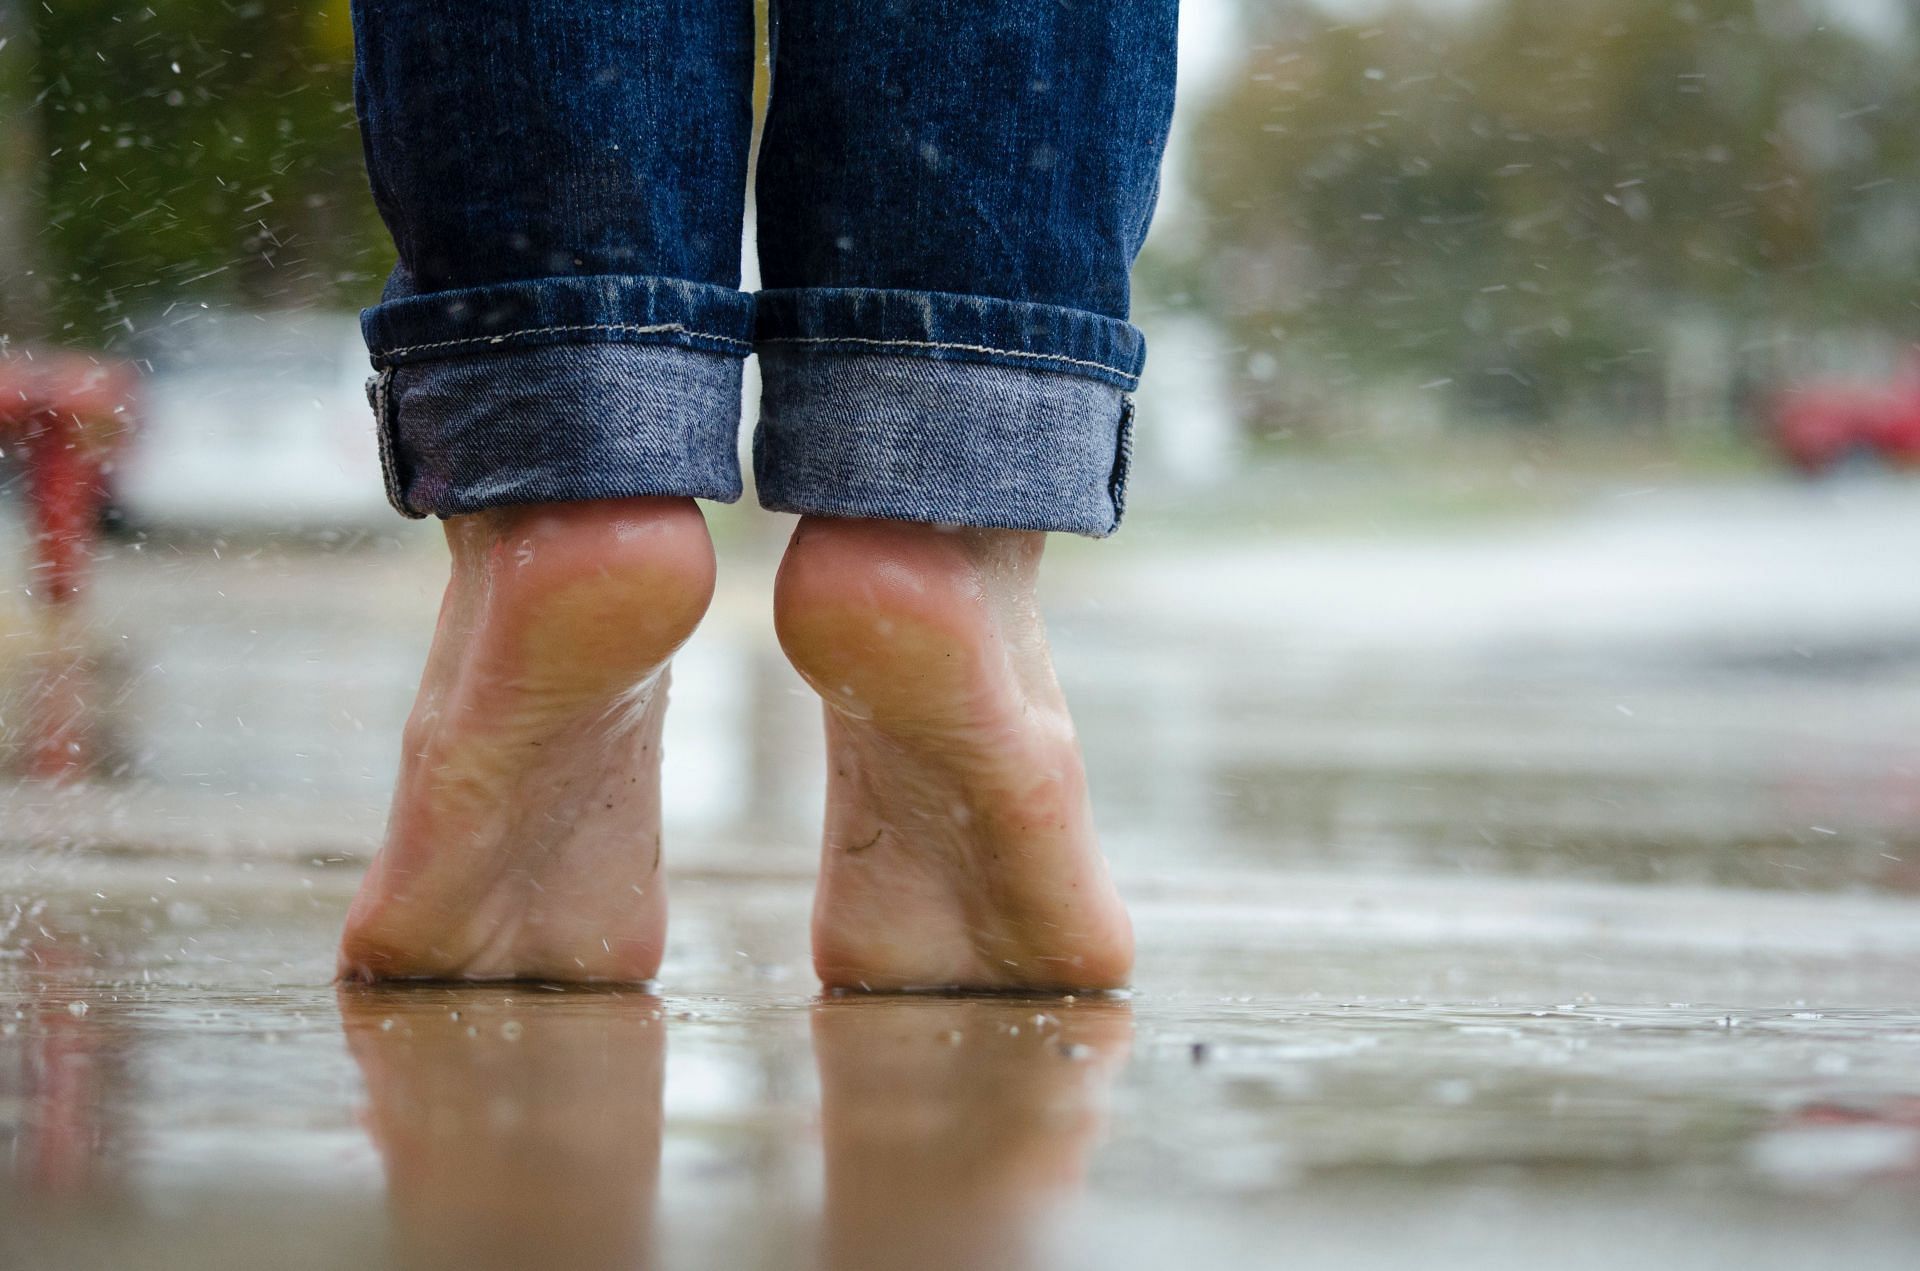 Importance of swollen toes treatments (image sourced via Pexels / Photo by alicia)